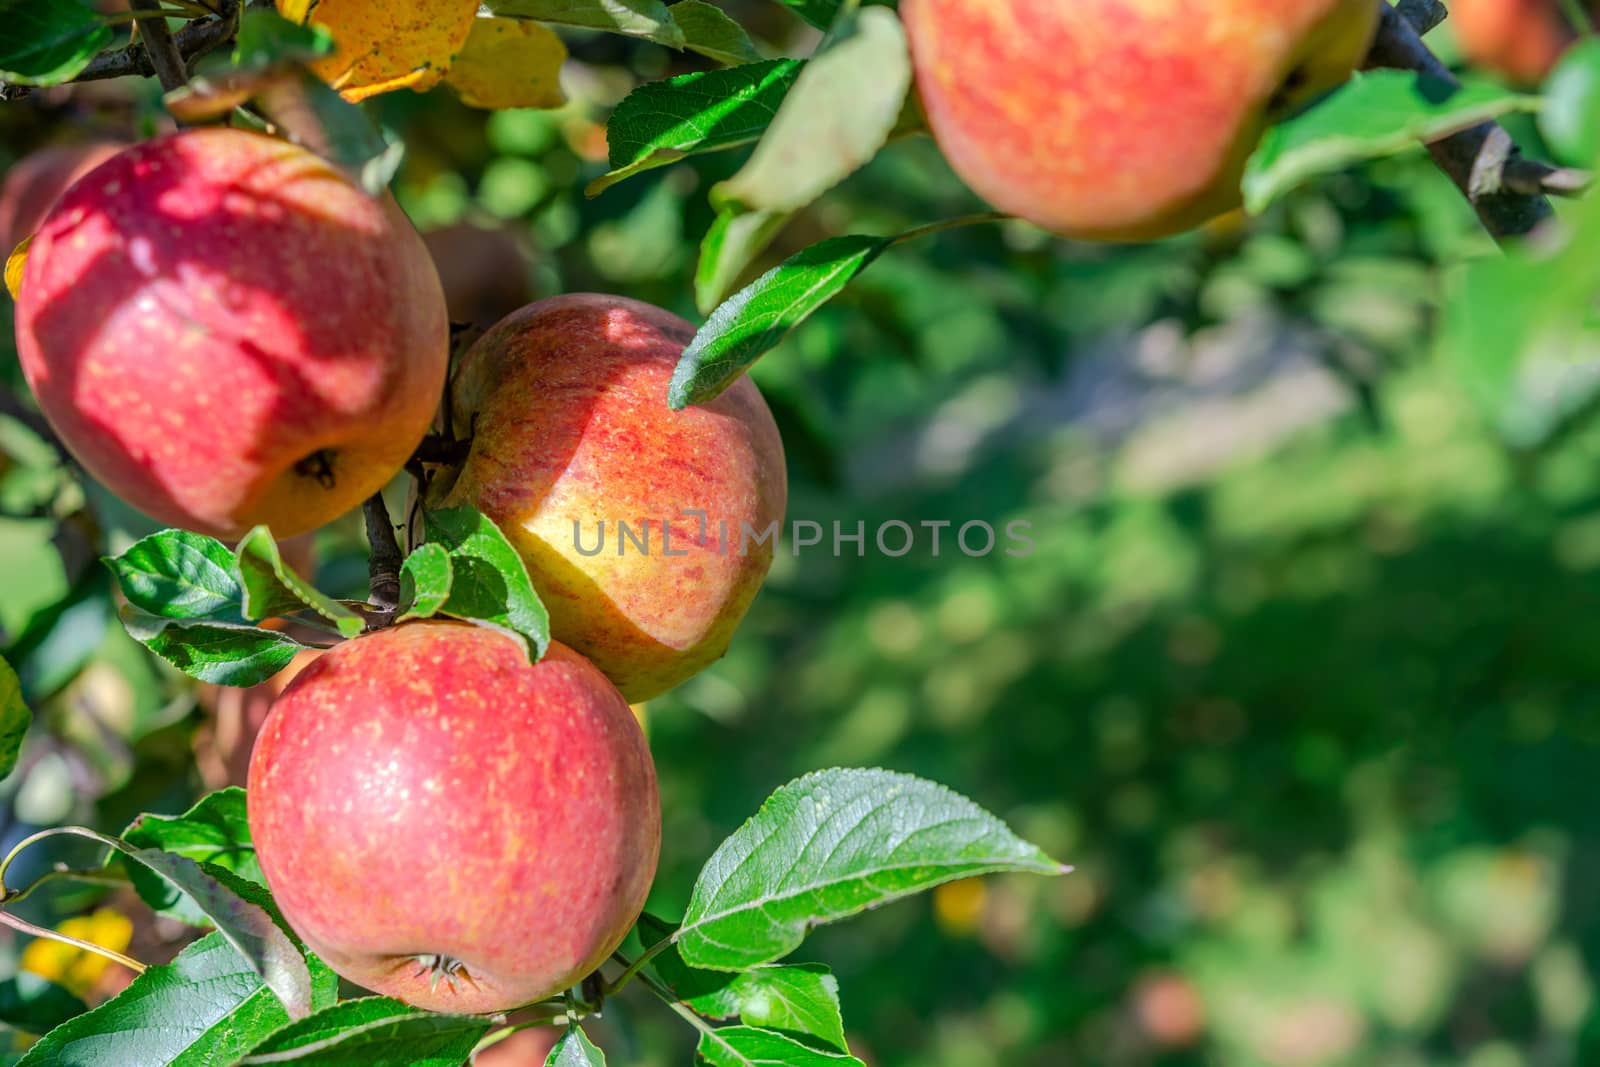 Agricultural background - bunch of apples on the tree from organic farming.